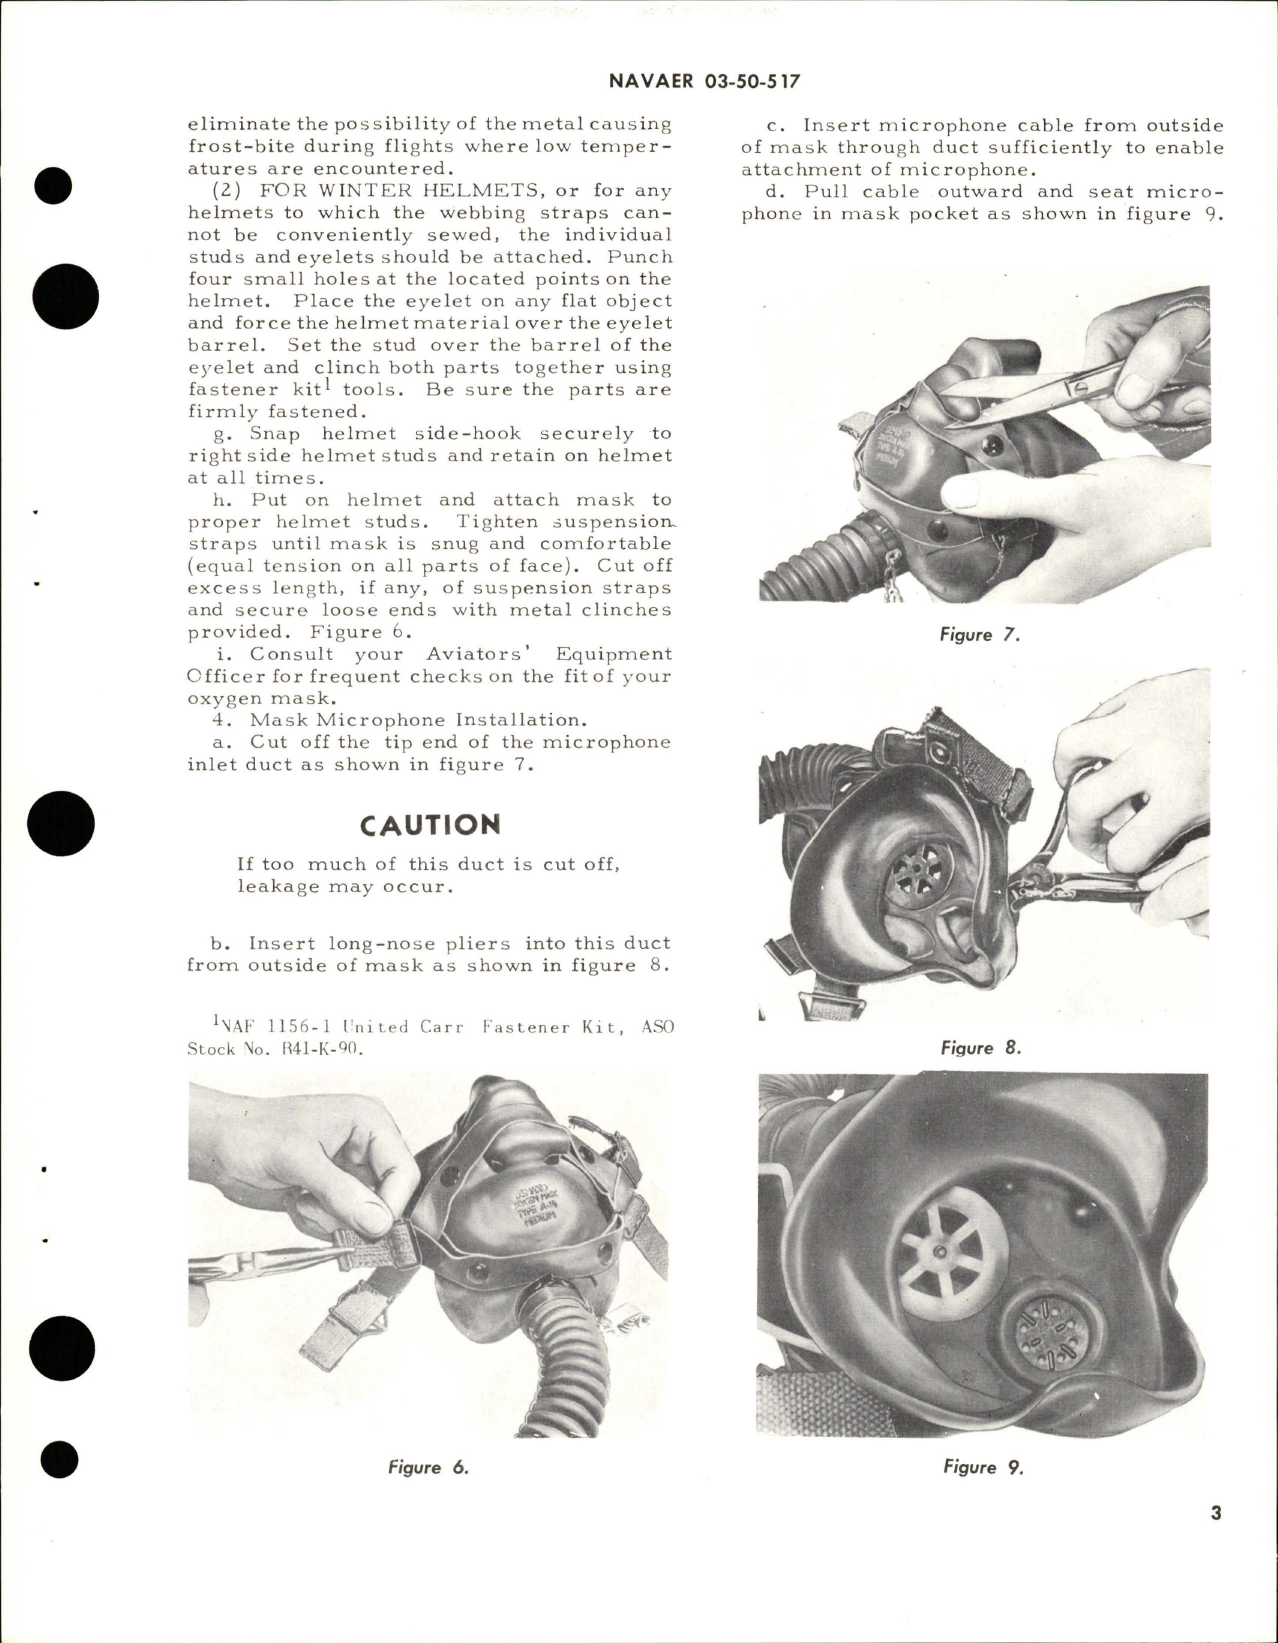 Sample page 9 from AirCorps Library document: Handbook for Naval Aircraft for Oxygen Equipment